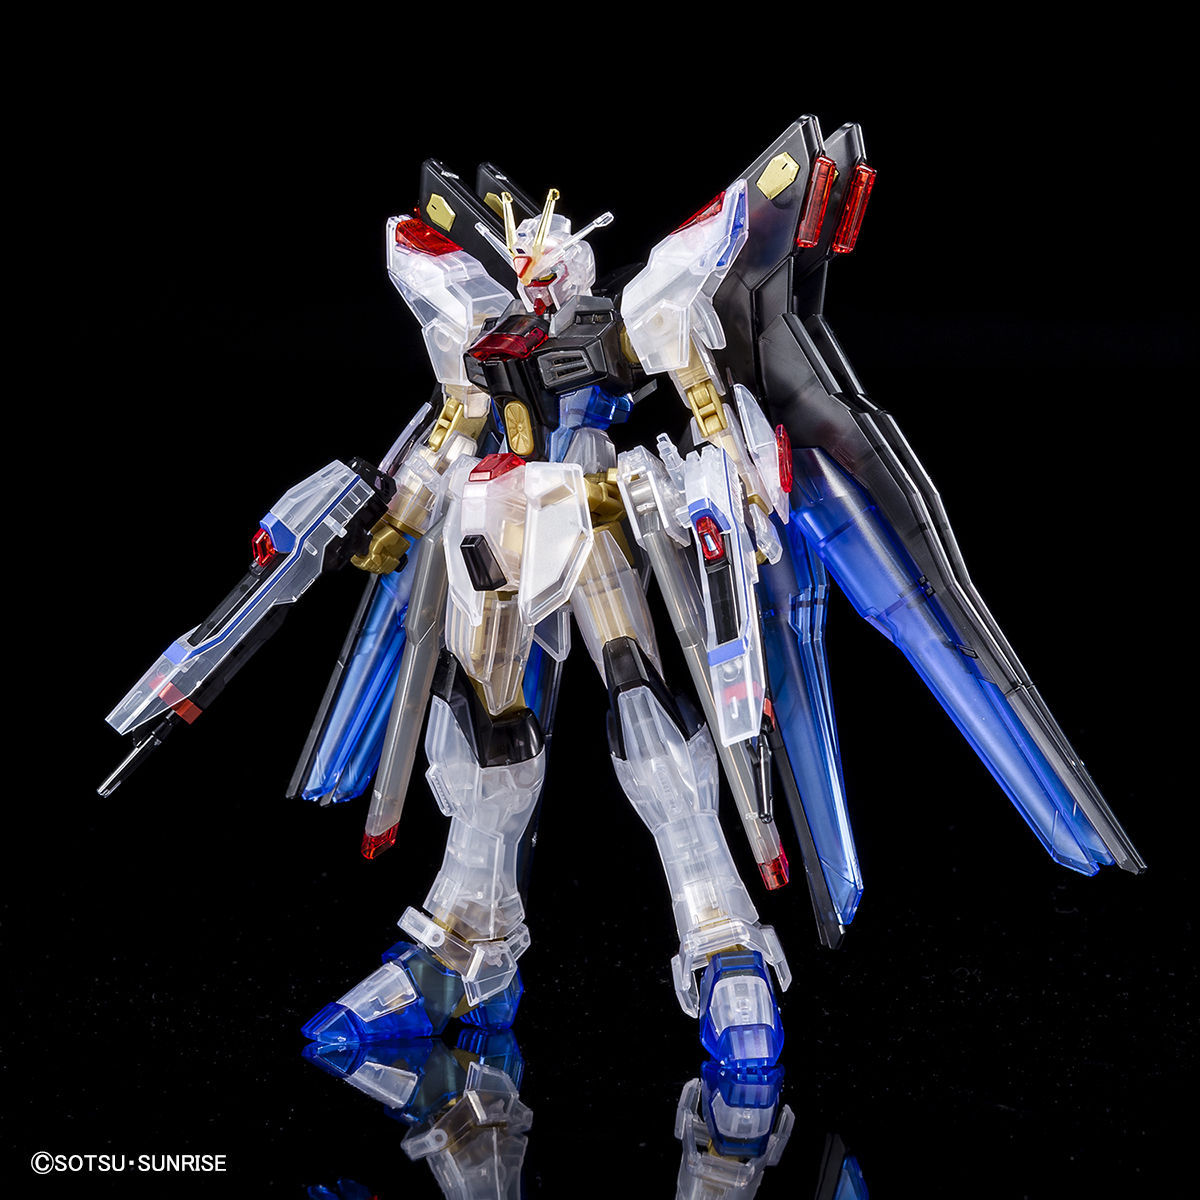 HGCE-Revive- 1/144 ZGMF-X20A Strike Freedom Gundam(Clear Color)